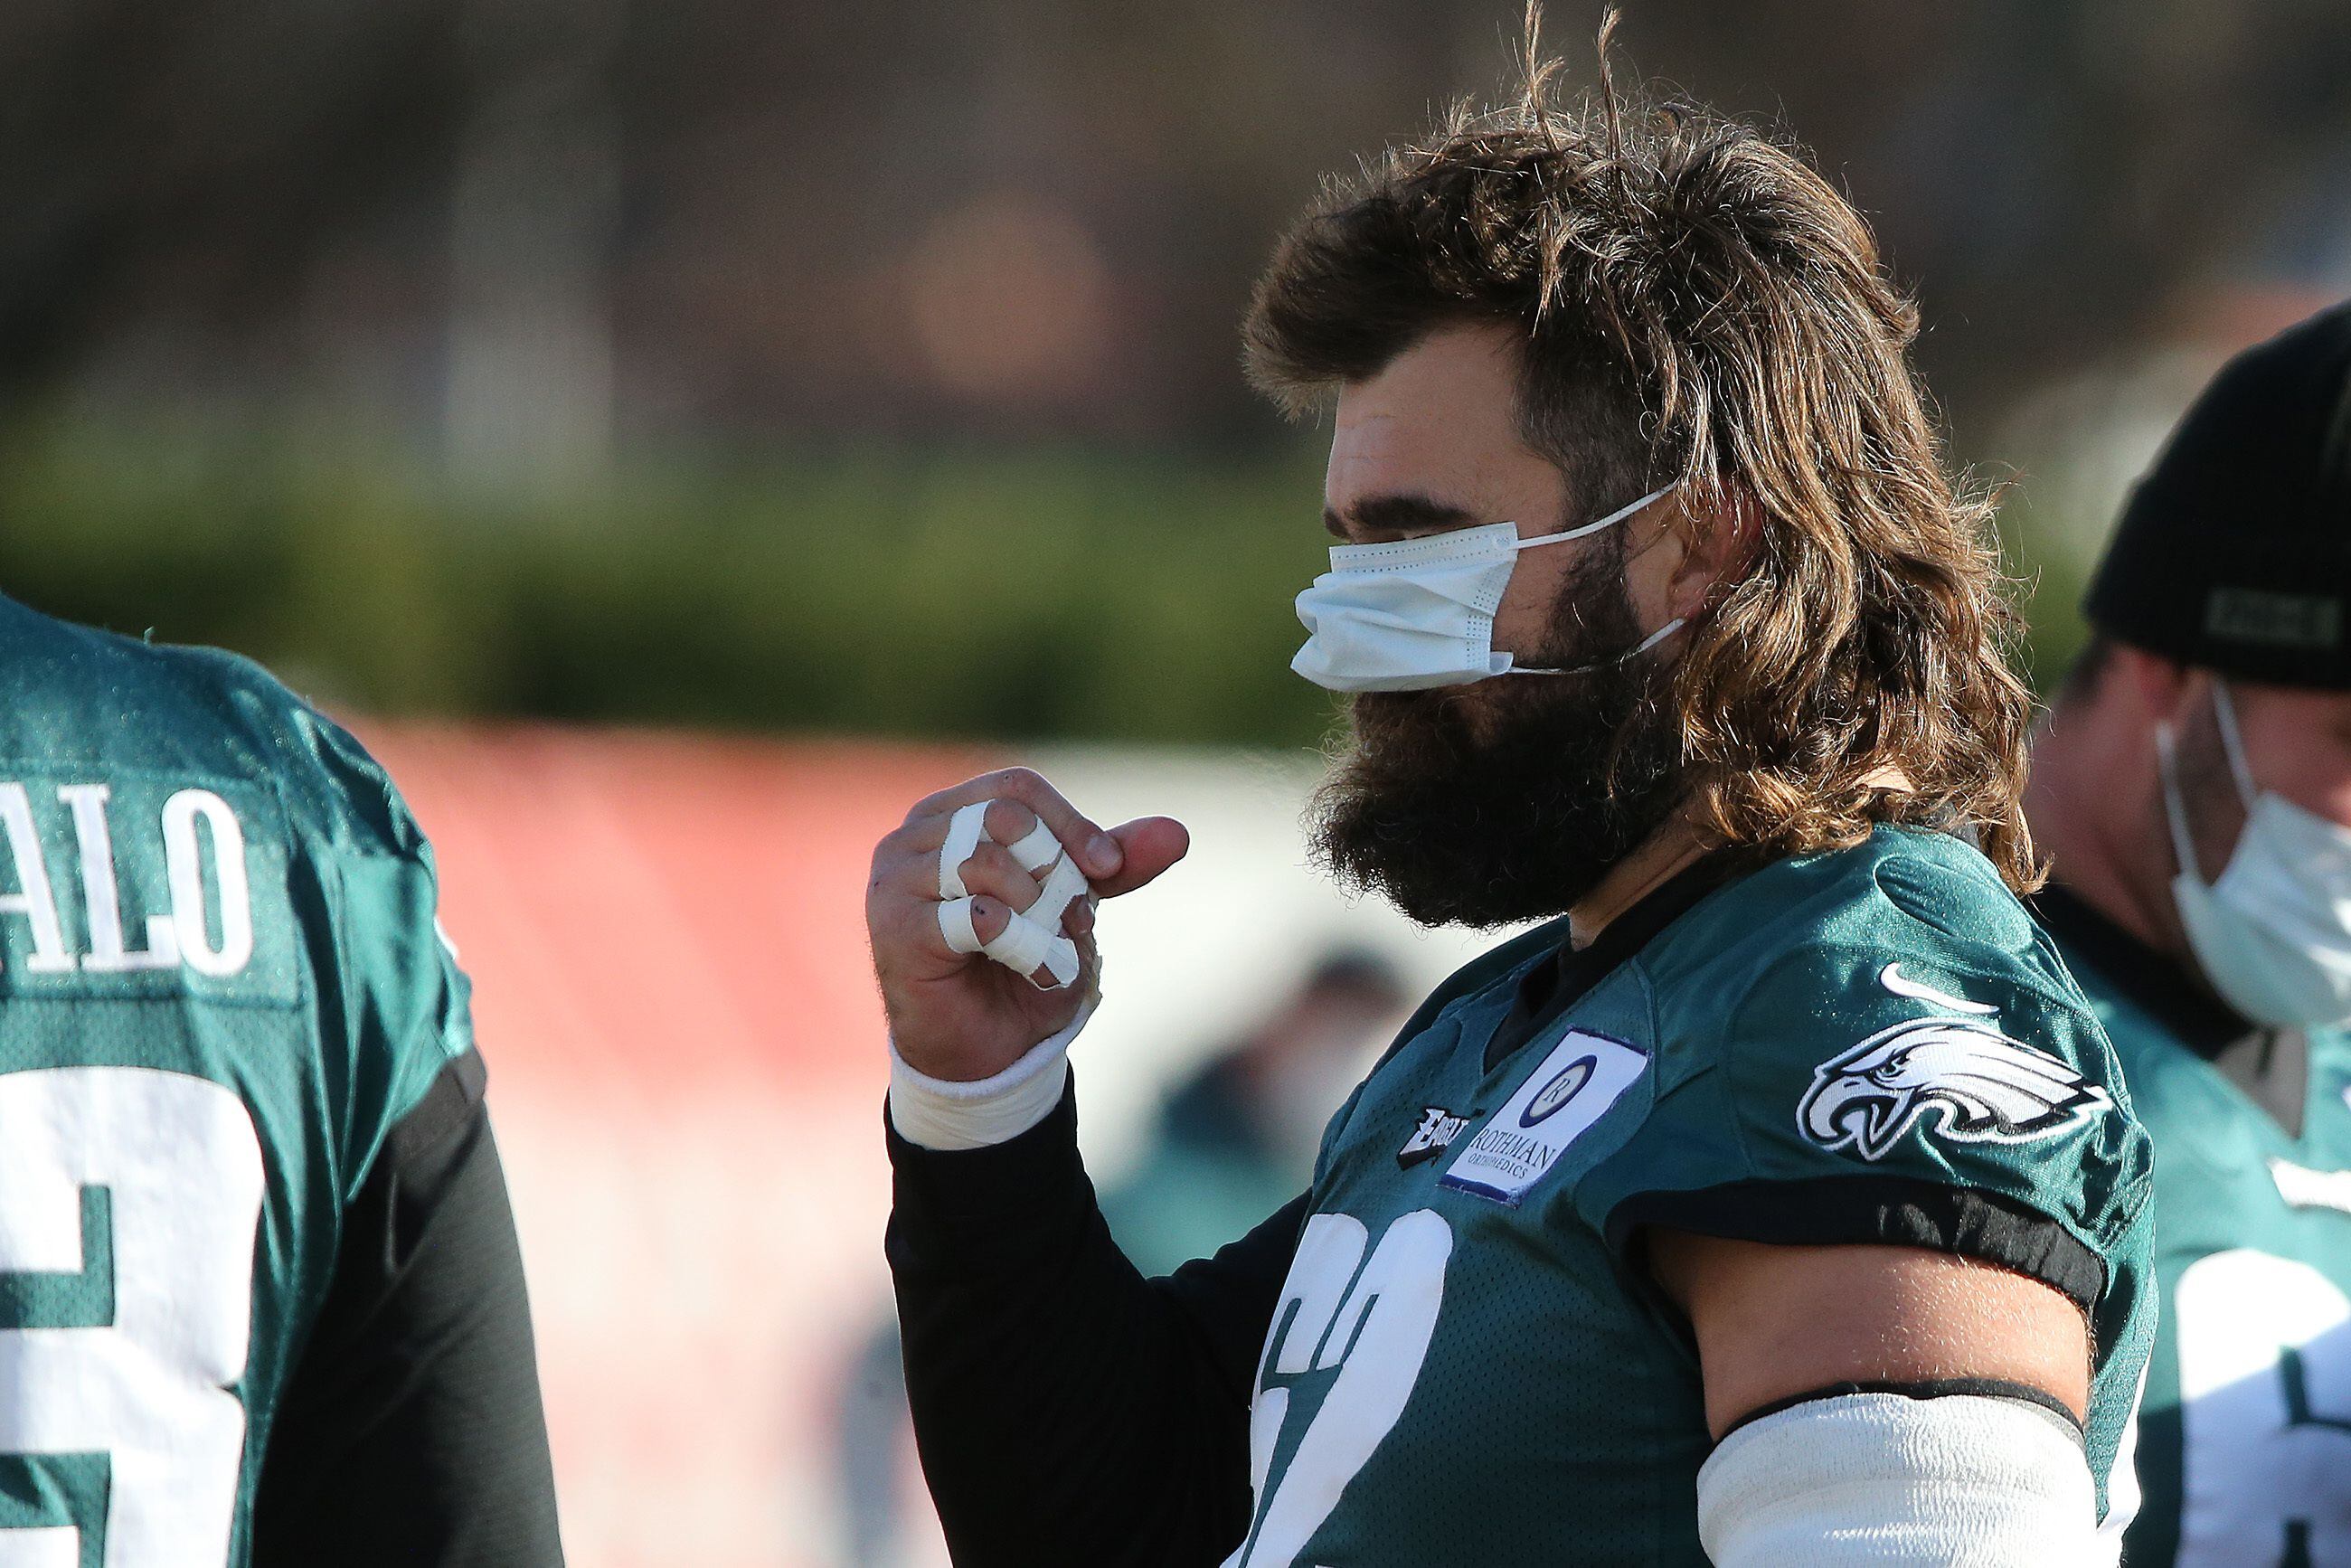 Jason Kelce Retires, Philadelphia Eagles React: 'Forever A Special Place in  My Heart' - Sports Illustrated Philadelphia Eagles News, Analysis and More